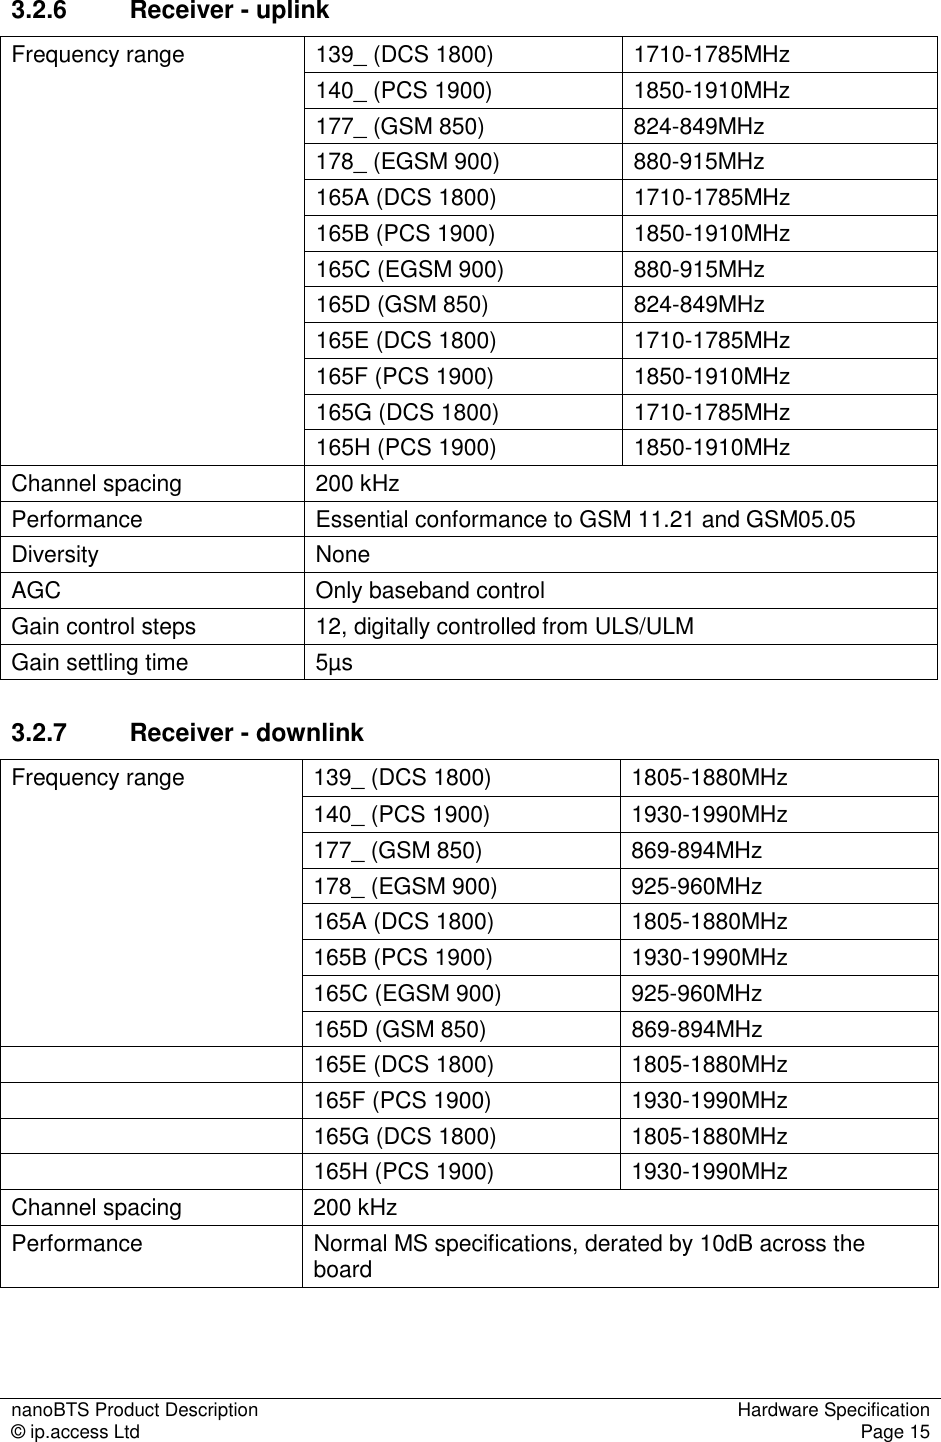 nanoBTS Product Description  Hardware Specification © ip.access Ltd  Page 15  3.2.6  Receiver - uplink 139_ (DCS 1800)  1710-1785MHz 140_ (PCS 1900)  1850-1910MHz 177_ (GSM 850)  824-849MHz Frequency range 178_ (EGSM 900)  880-915MHz   165A (DCS 1800)  1710-1785MHz   165B (PCS 1900)  1850-1910MHz   165C (EGSM 900)  880-915MHz   165D (GSM 850)  824-849MHz   165E (DCS 1800)  1710-1785MHz   165F (PCS 1900)  1850-1910MHz   165G (DCS 1800)  1710-1785MHz   165H (PCS 1900)  1850-1910MHz Channel spacing  200 kHz Performance  Essential conformance to GSM 11.21 and GSM05.05 Diversity  None AGC  Only baseband control Gain control steps  12, digitally controlled from ULS/ULM Gain settling time  5µs 3.2.7  Receiver - downlink 139_ (DCS 1800)  1805-1880MHz 140_ (PCS 1900)  1930-1990MHz 177_ (GSM 850)  869-894MHz 178_ (EGSM 900)  925-960MHz 165A (DCS 1800)  1805-1880MHz 165B (PCS 1900)  1930-1990MHz 165C (EGSM 900)  925-960MHz Frequency range  165D (GSM 850)  869-894MHz   165E (DCS 1800)  1805-1880MHz   165F (PCS 1900)  1930-1990MHz   165G (DCS 1800)  1805-1880MHz   165H (PCS 1900)  1930-1990MHz Channel spacing  200 kHz Performance  Normal MS specifications, derated by 10dB across the board  